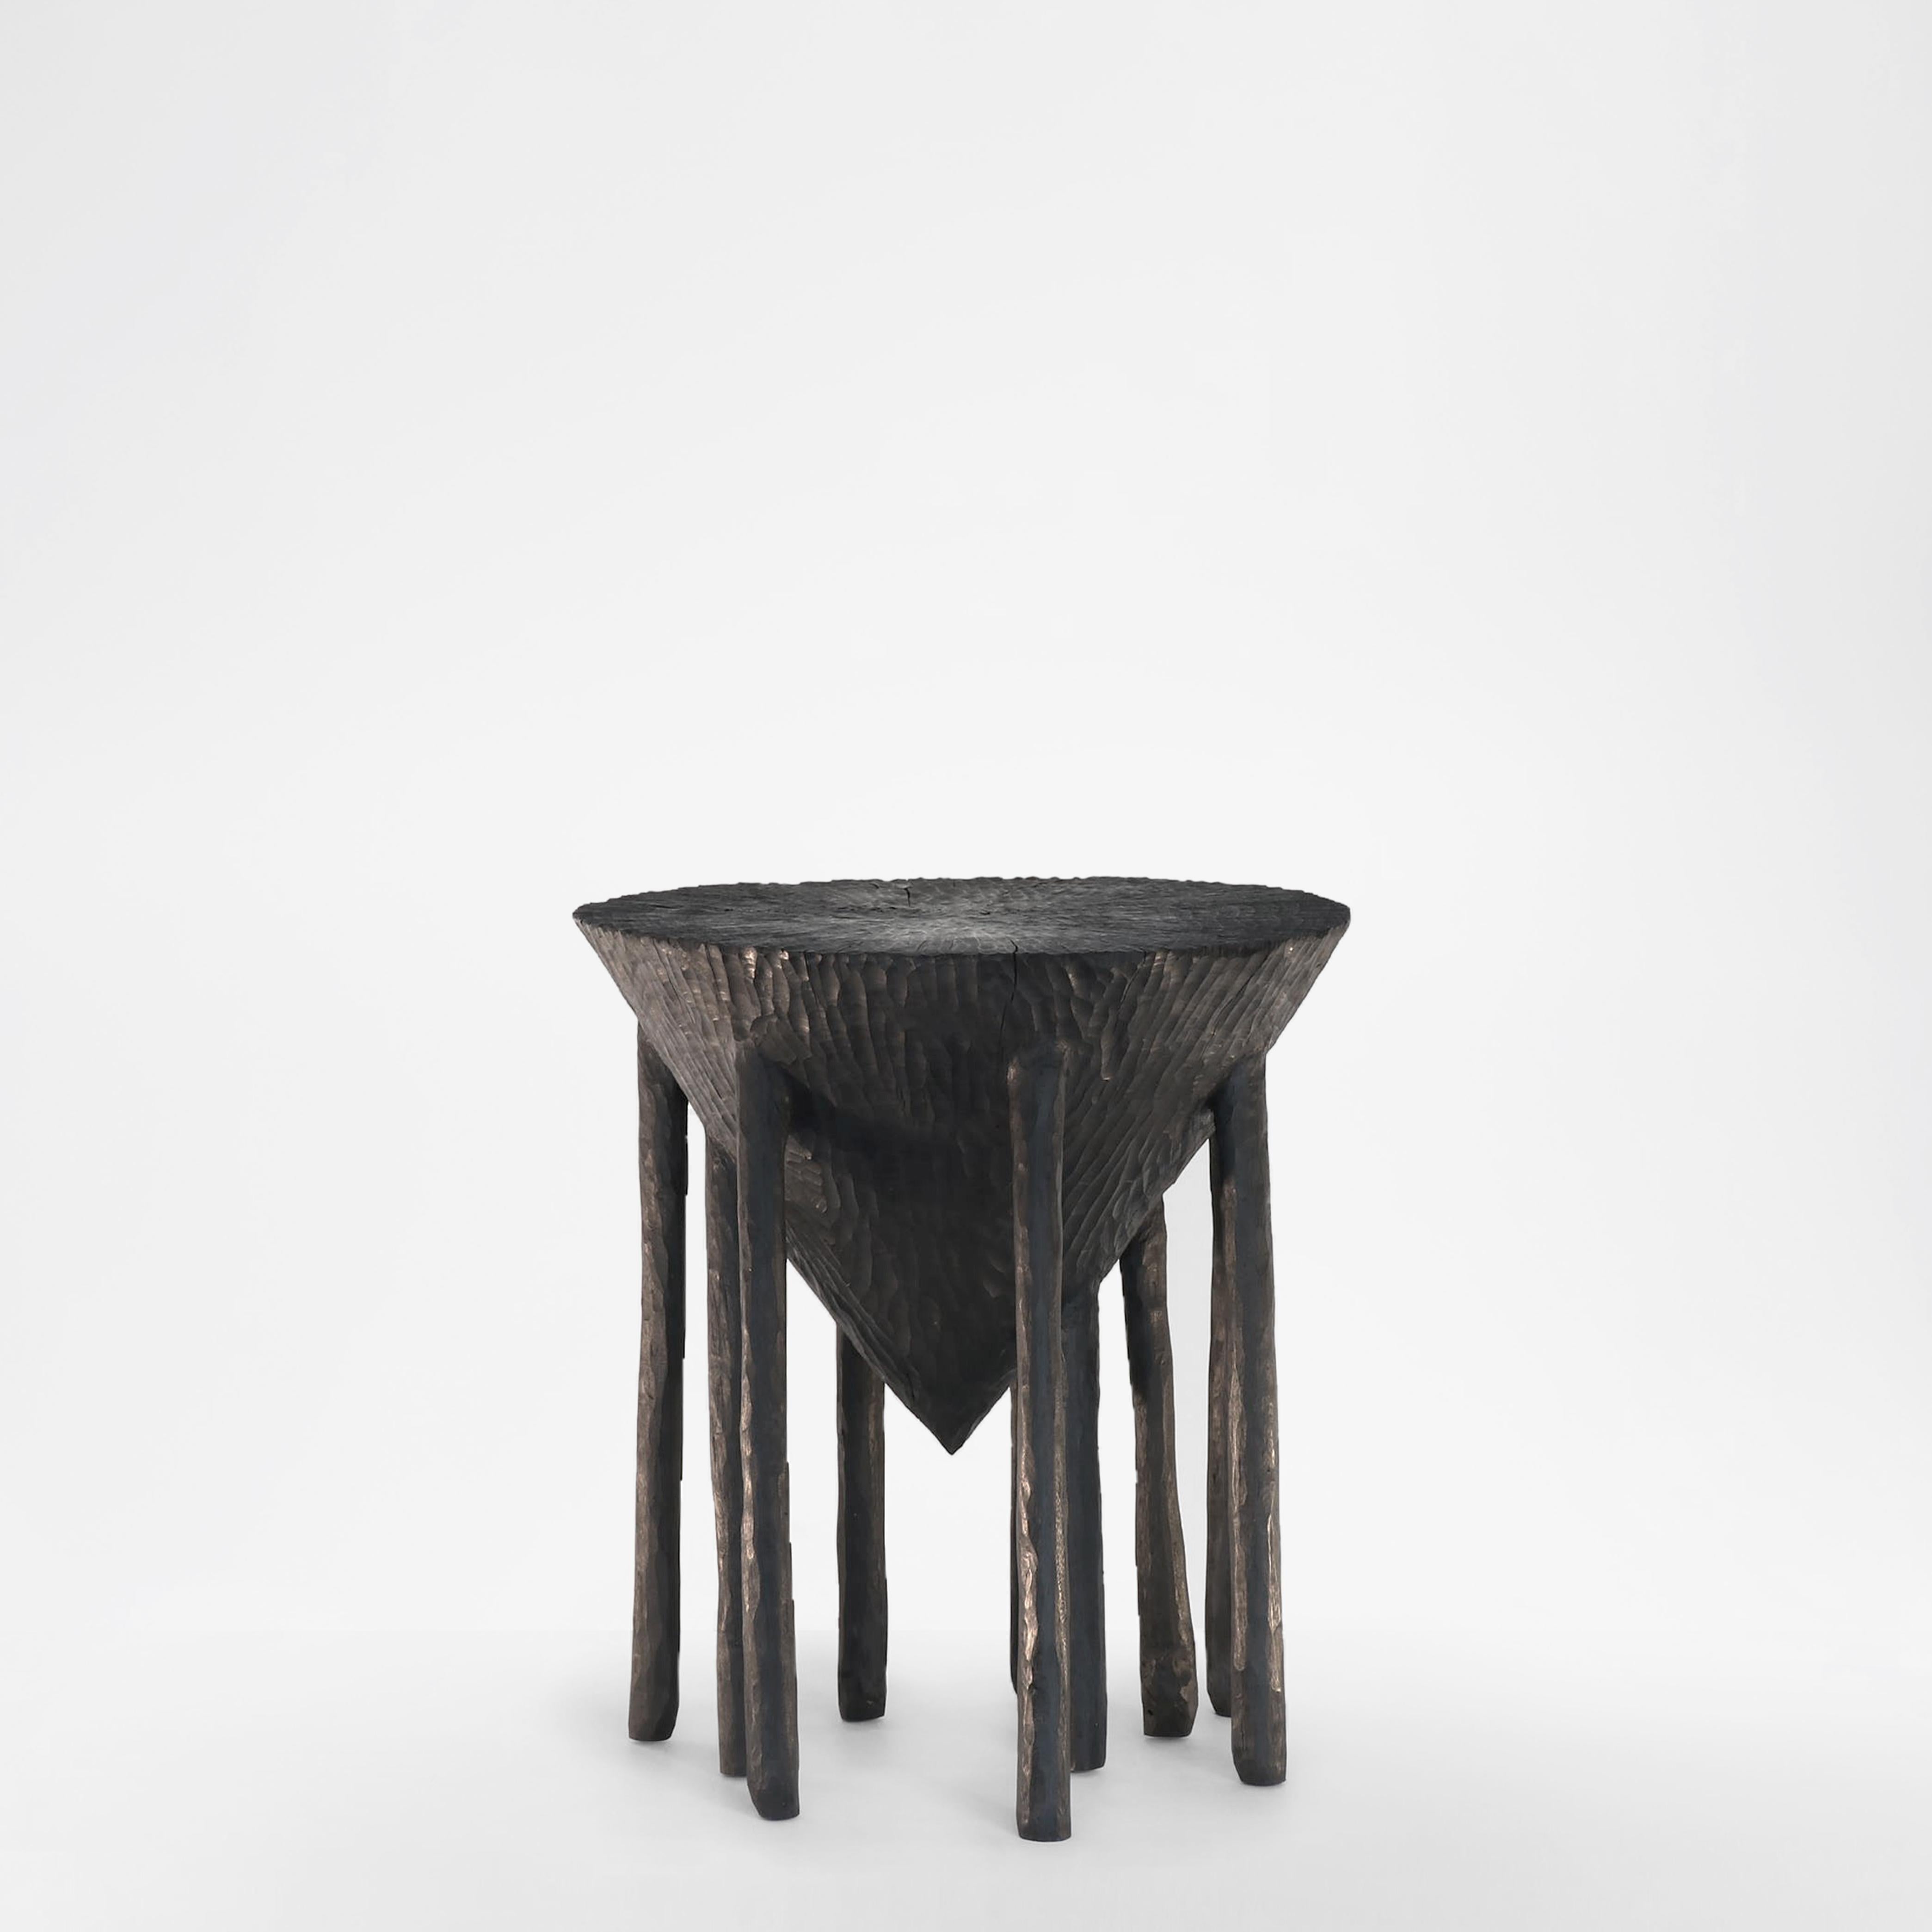 Large Untitled Side Table by Henry D'ath
Dimensions: D 70 x W 70 x H 70 cm
Materials: Wood.
Available finishes: Black ink. 


Henry d’ath is a New Zealand-born, Hong Kong-based artist and architect. 
Using predominantly salvaged material, the artist